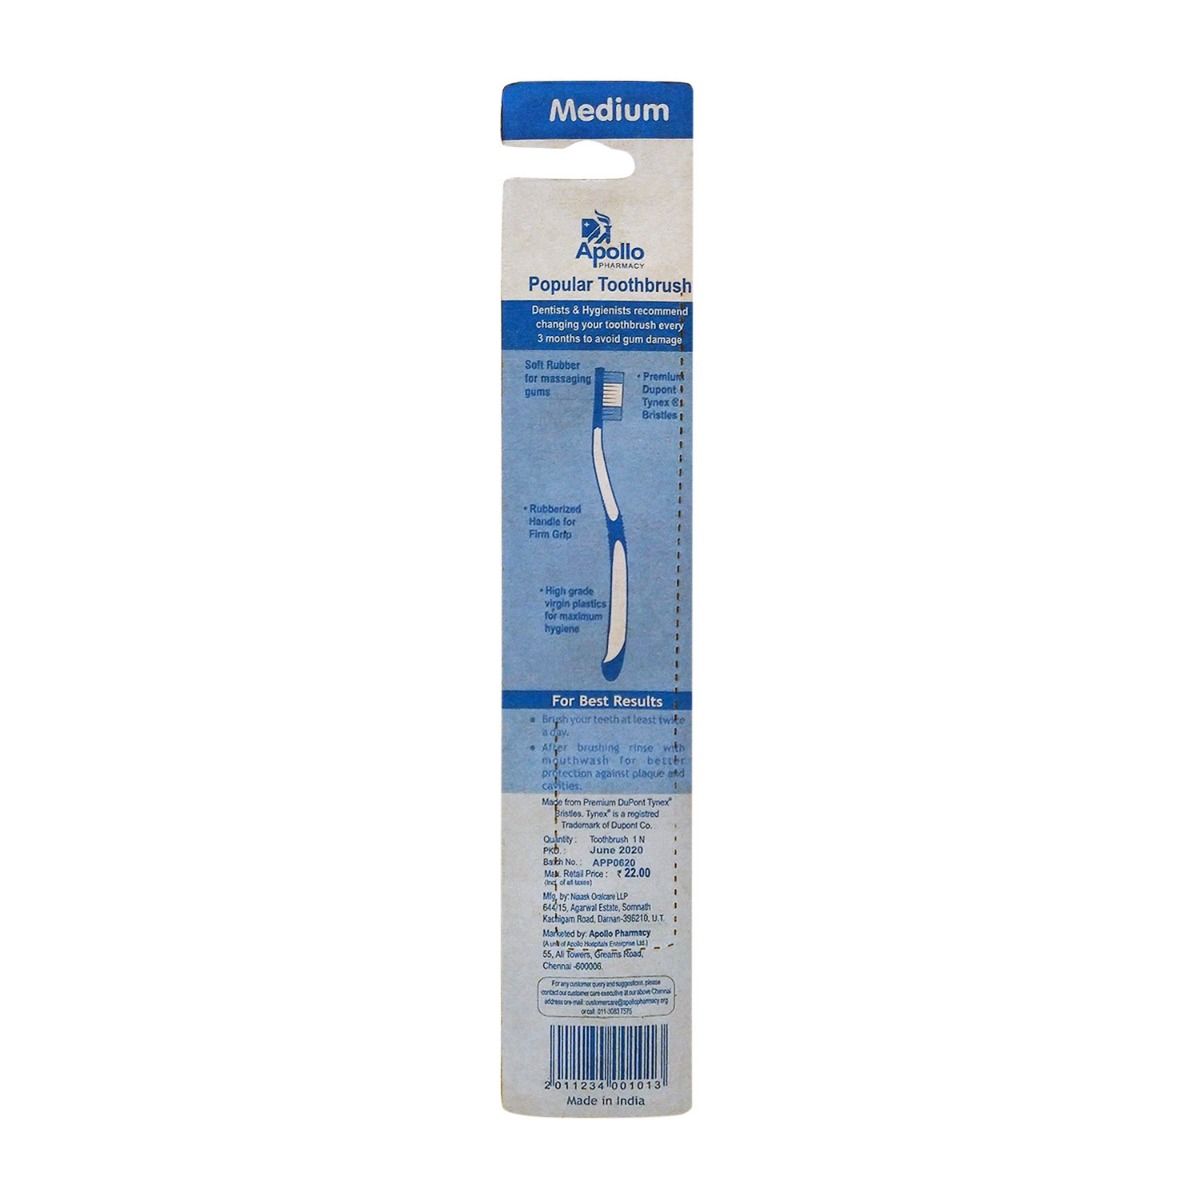 Apollo Pharmacy Popular Toothbrush, 1 Count, Pack of 1 